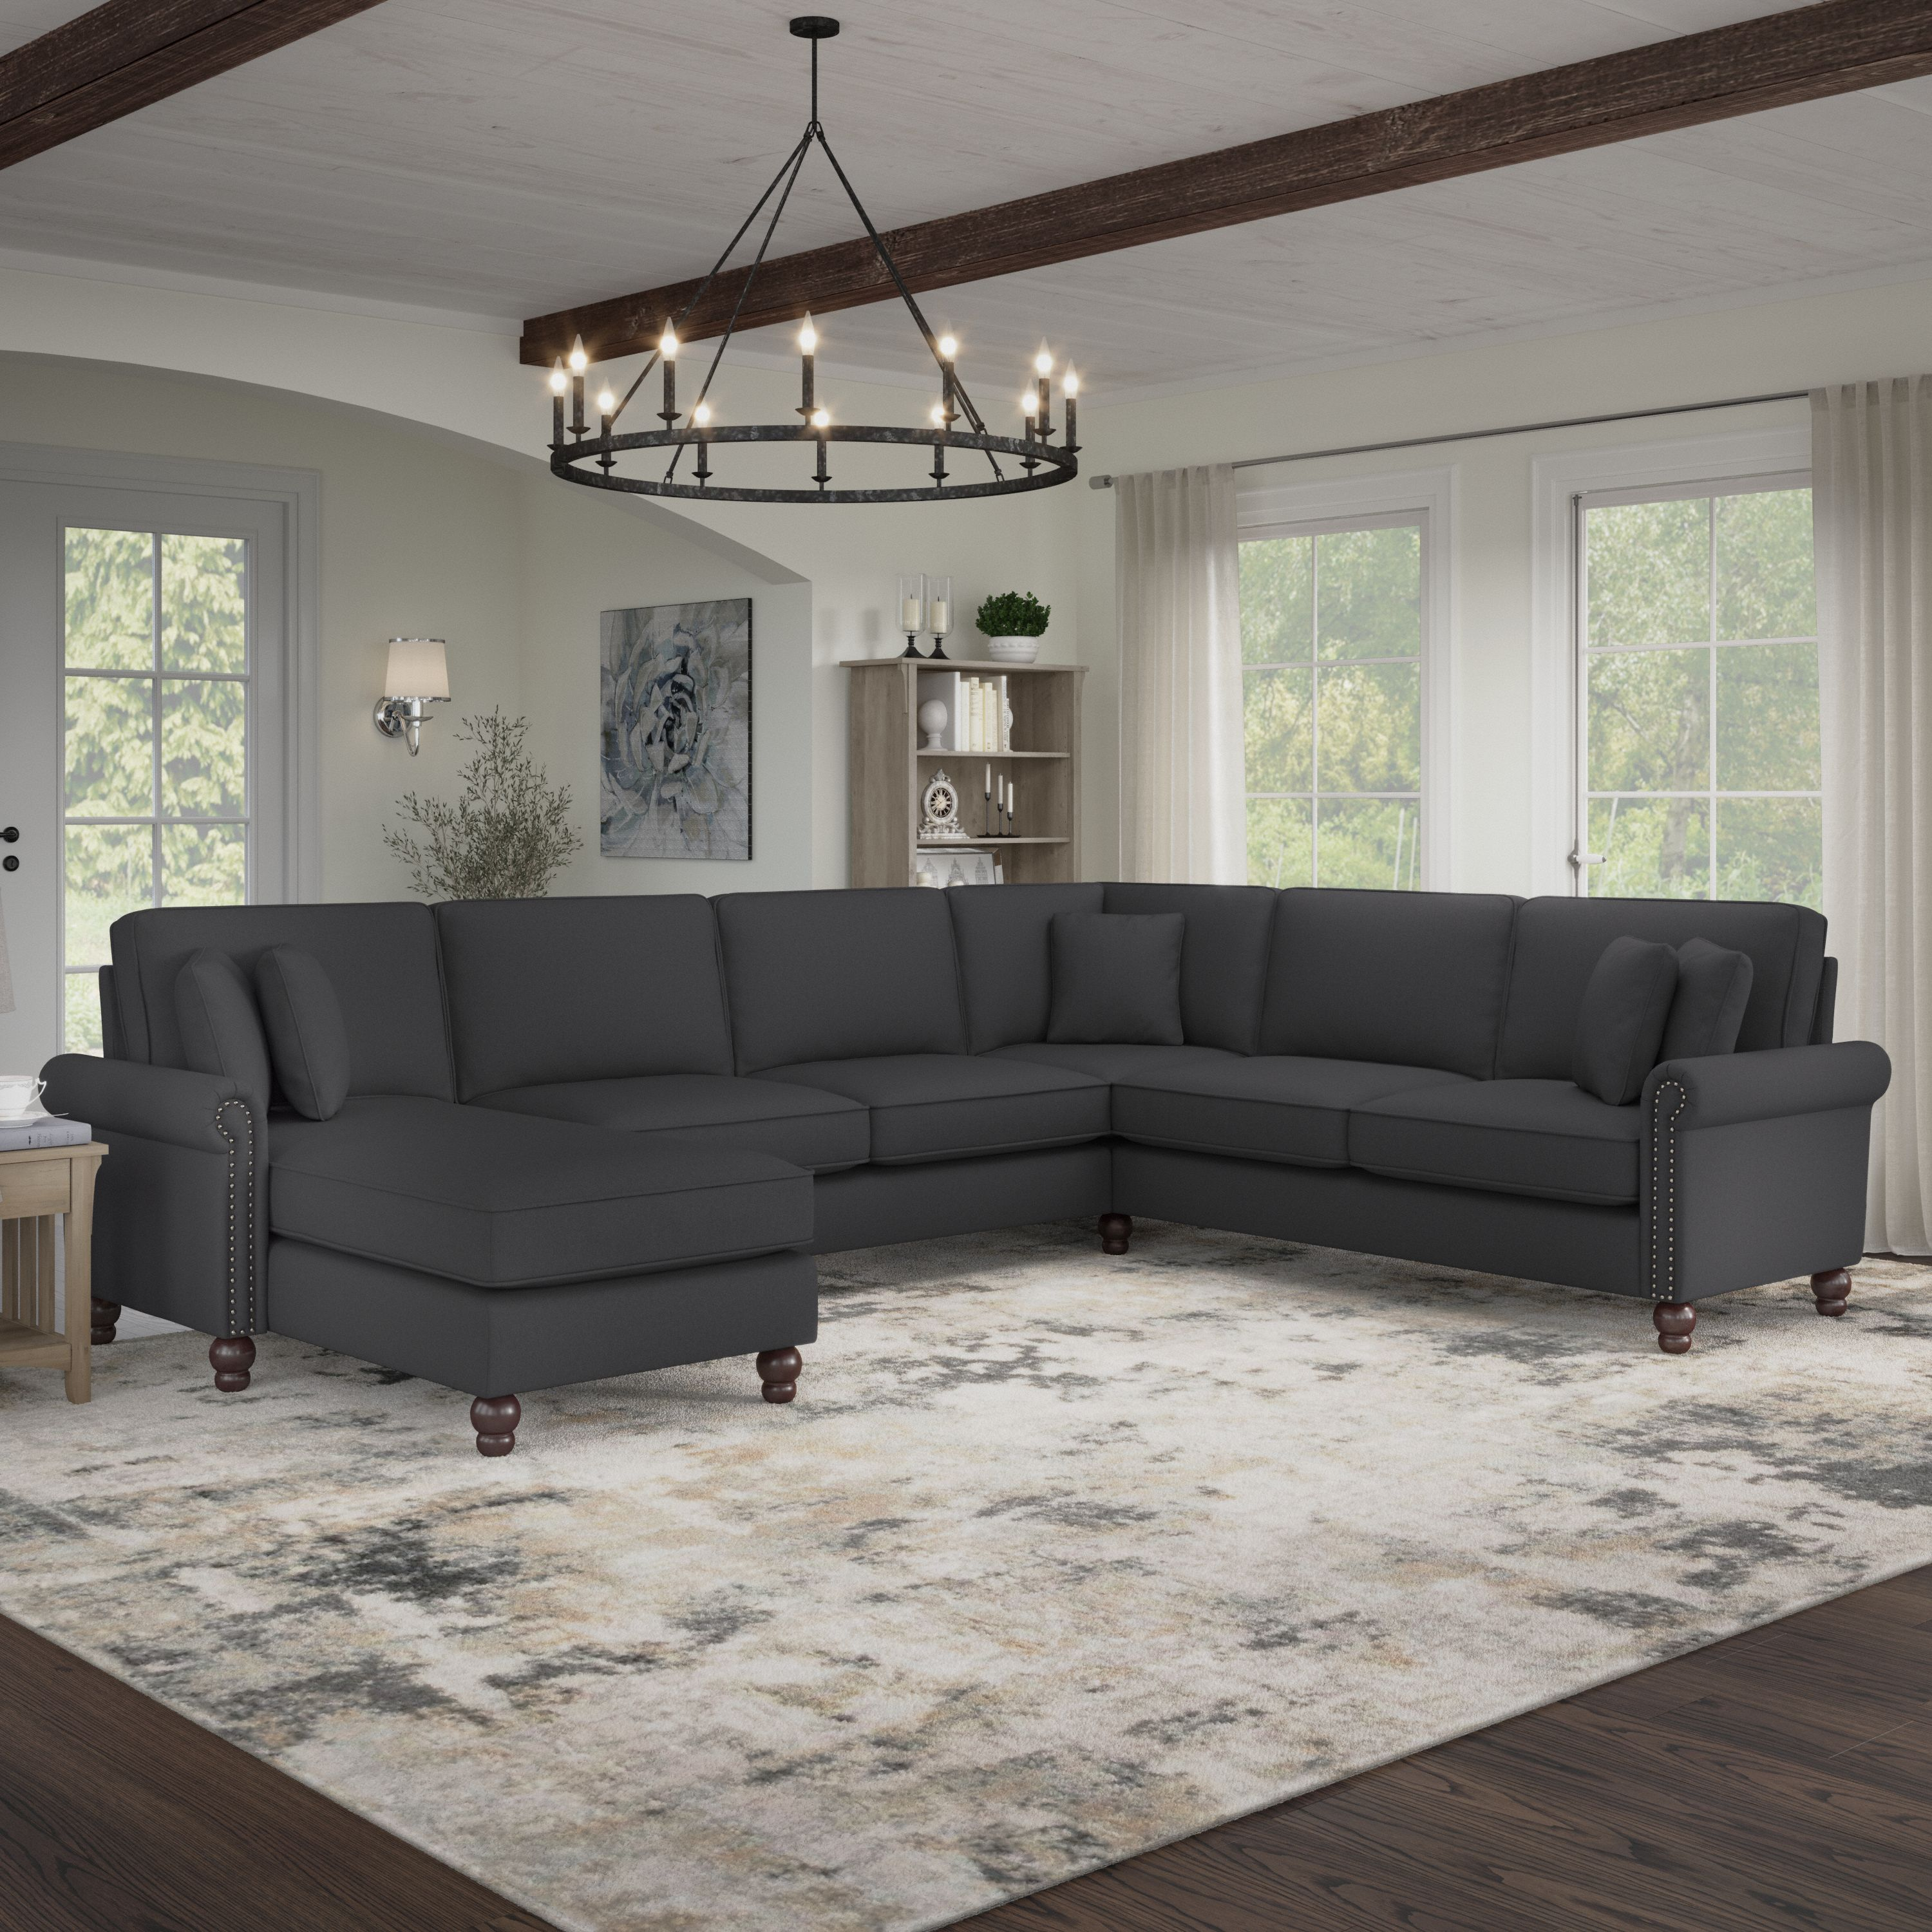 Shop Bush Furniture Coventry 128W U Shaped Sectional Couch with Reversible Chaise Lounge 01 CVY127BCGH-03K #color_charcoal gray herringbone fabr